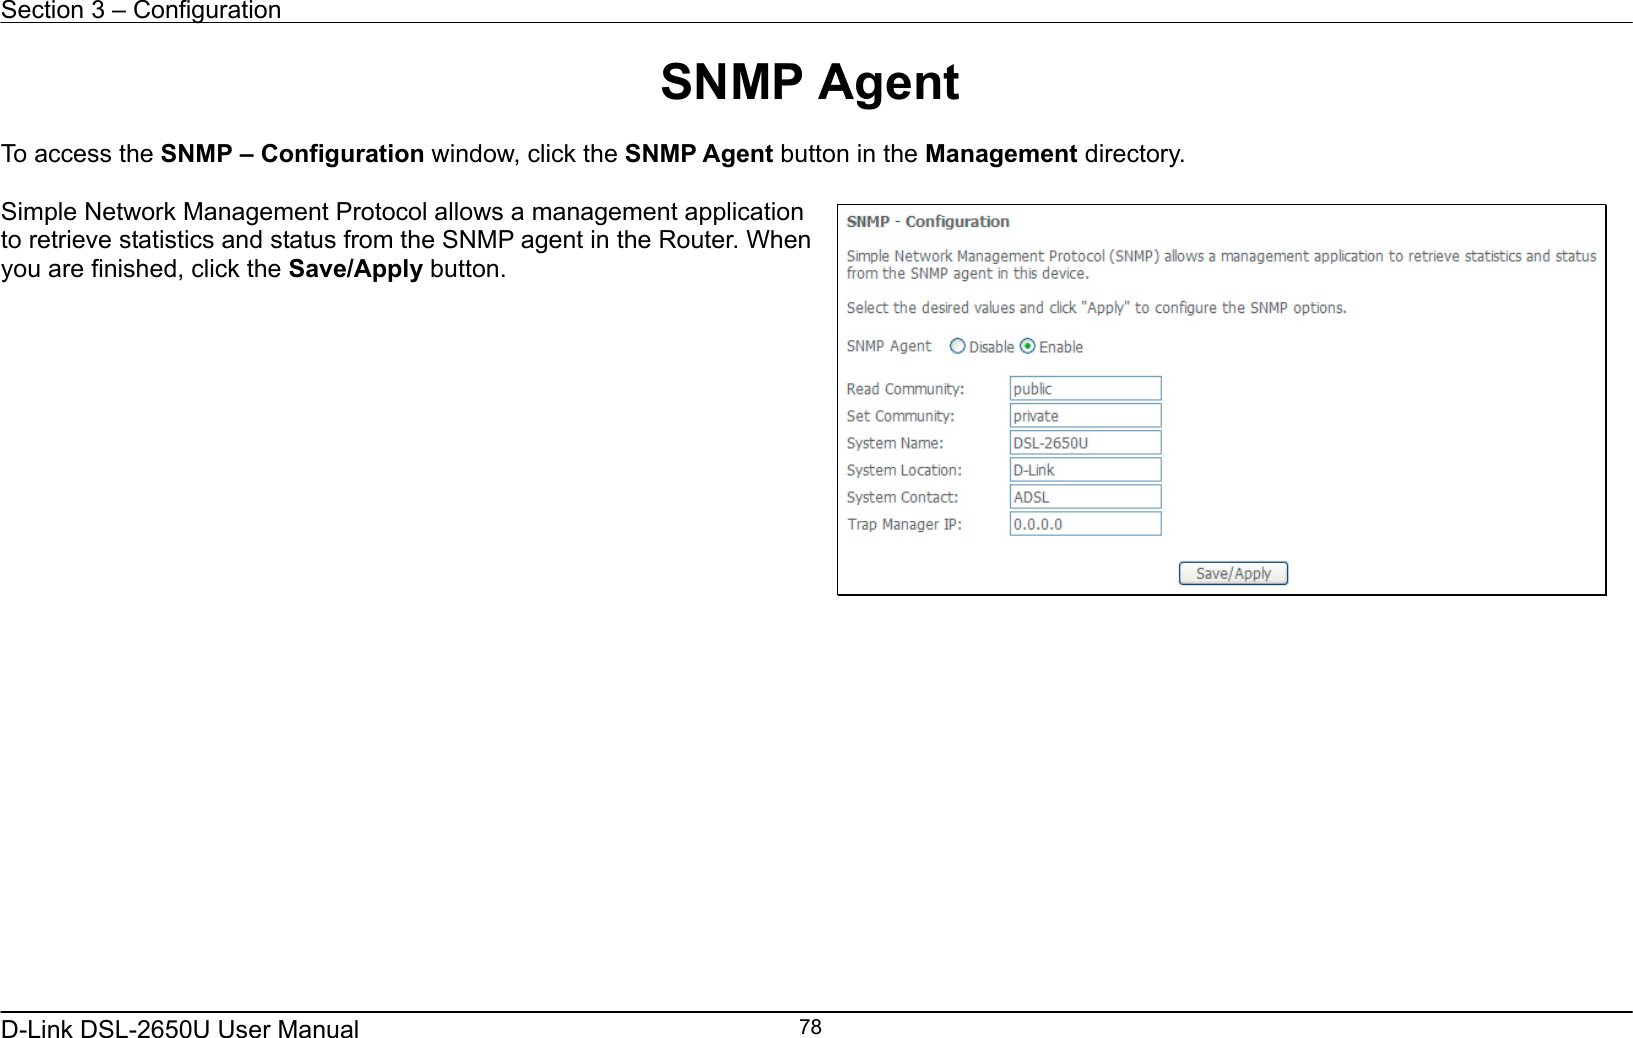 Section 3 – Configuration   D-Link DSL-2650U User Manual    78SNMP Agent  To access the SNMP – Configuration window, click the SNMP Agent button in the Management directory.  Simple Network Management Protocol allows a management application to retrieve statistics and status from the SNMP agent in the Router. When you are finished, click the Save/Apply button.                   